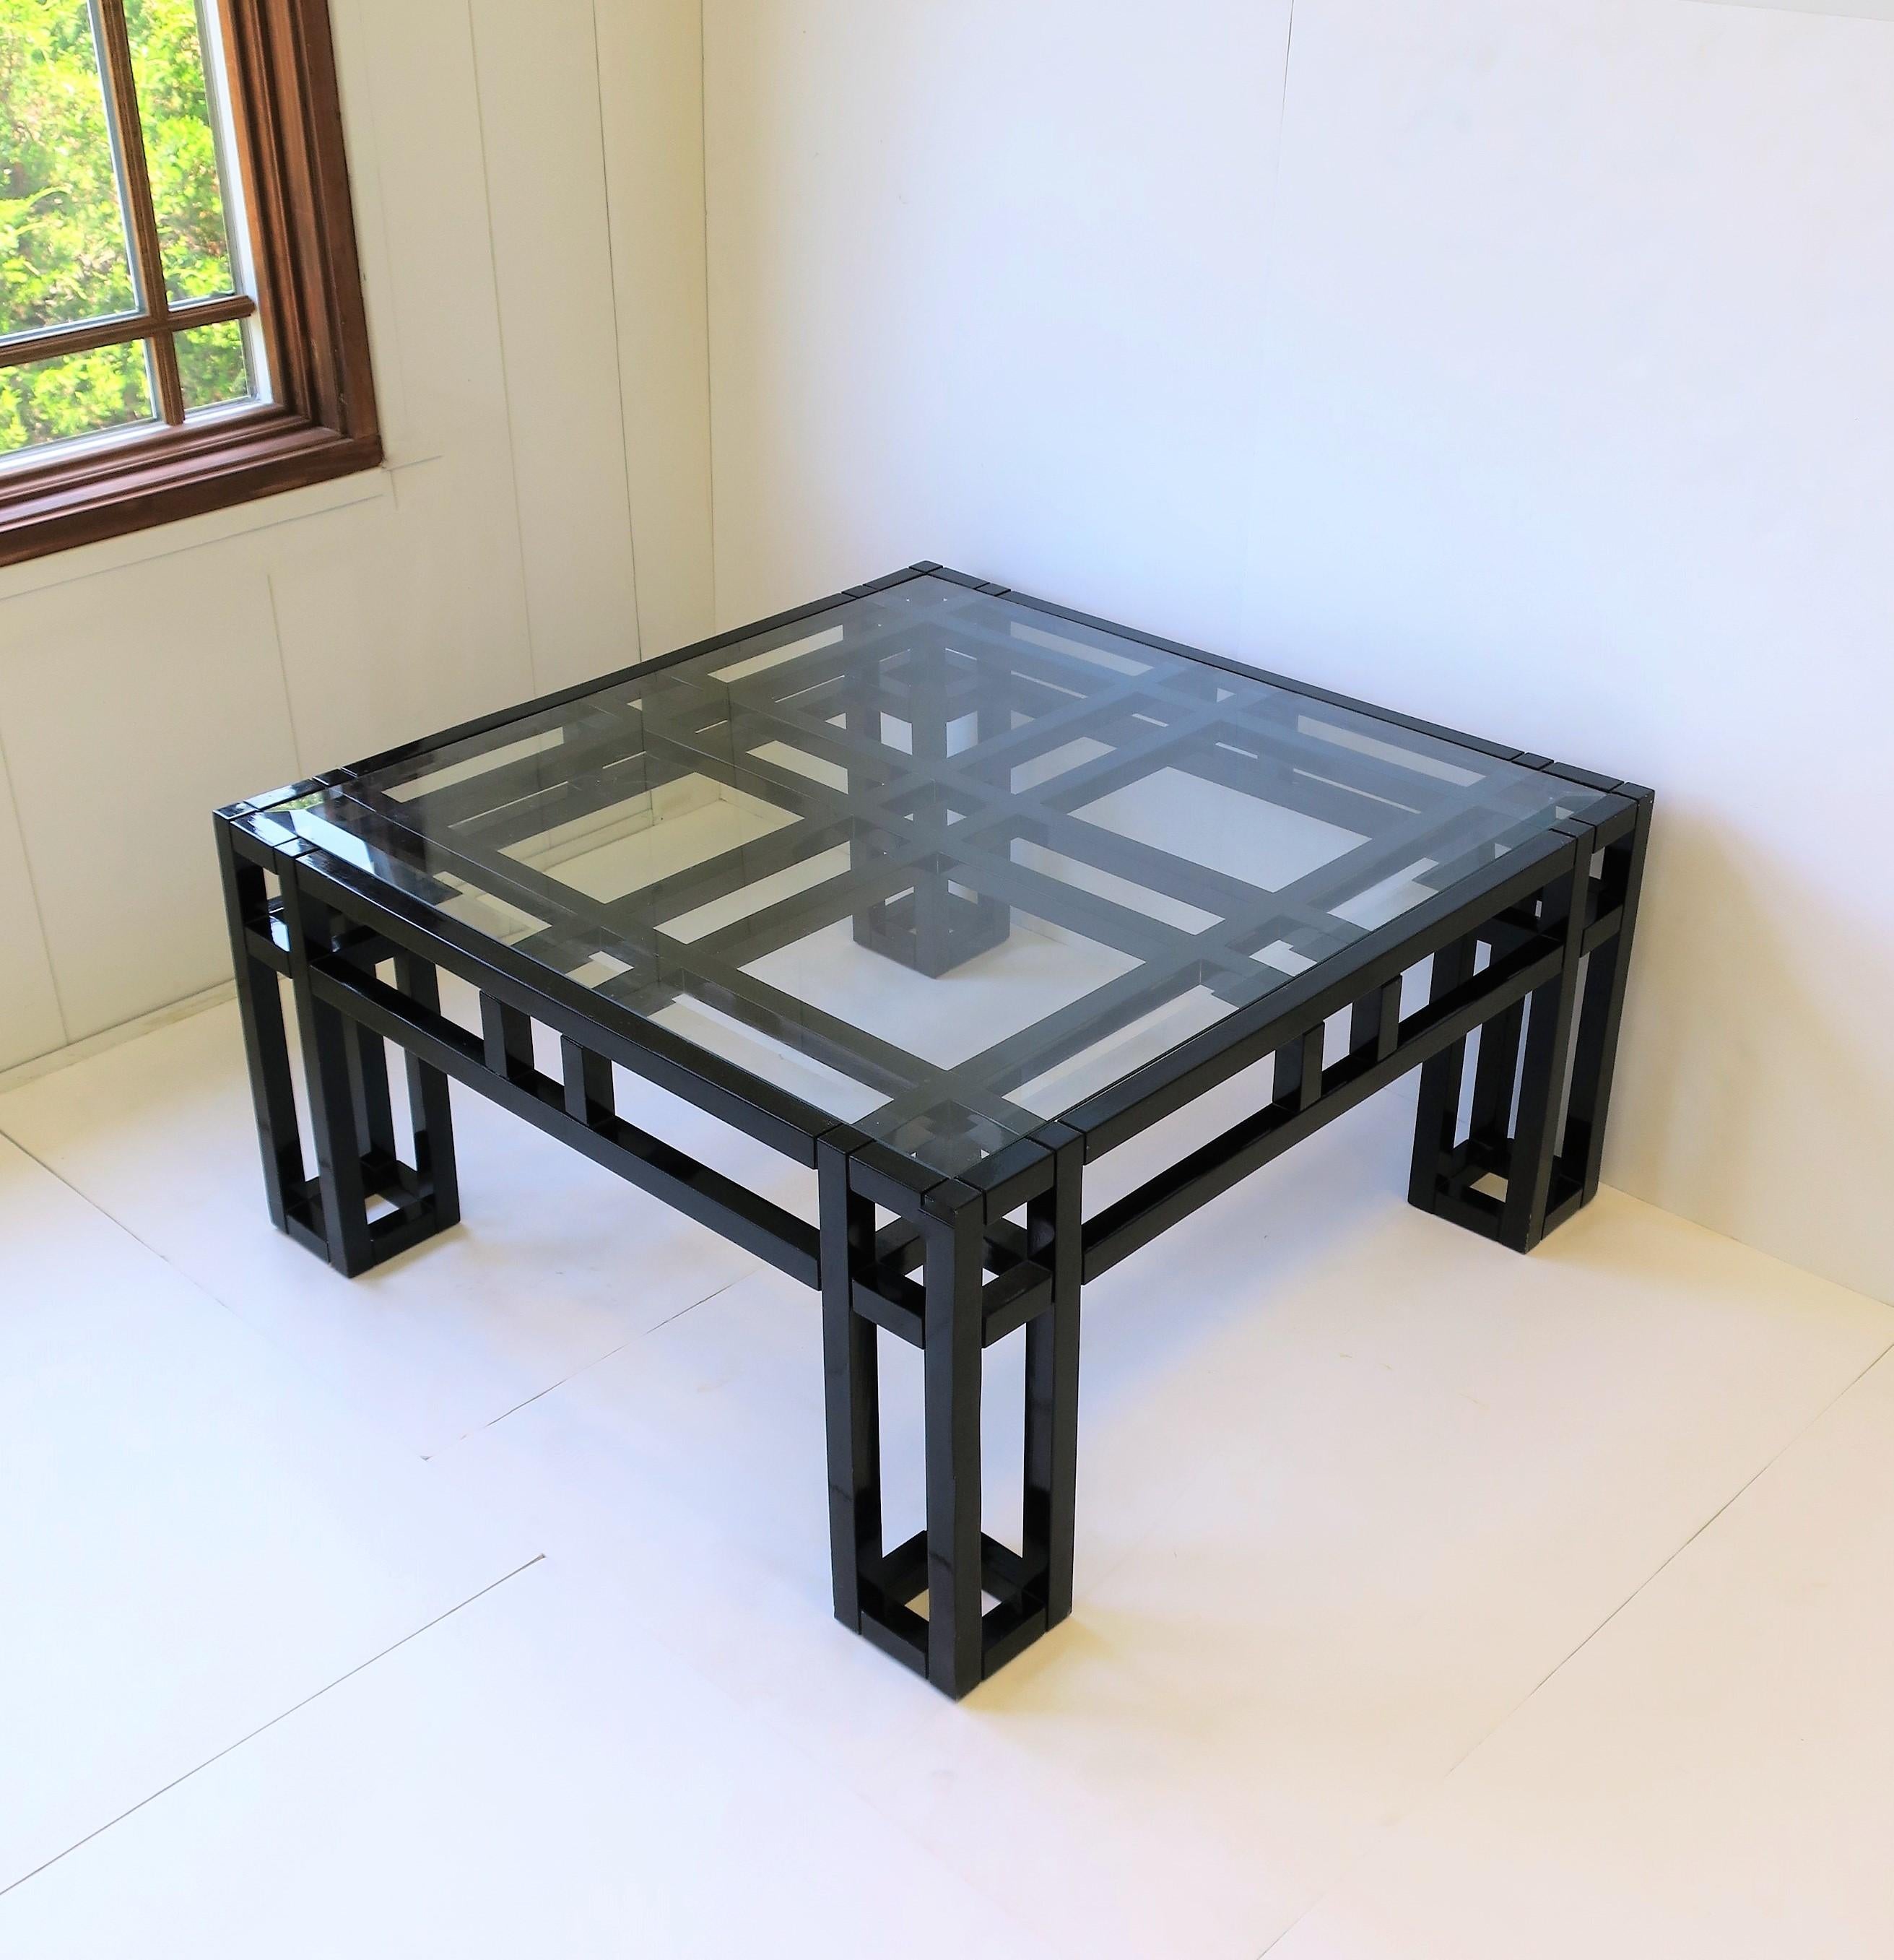 A very beautiful geometric square coffee/cocktail table in black lacquer with glass top, Postmodern period, late-20th century, 1980s. Glass top has beveled edge and is 'inset' into coffee table frame. Table measures: 33.38